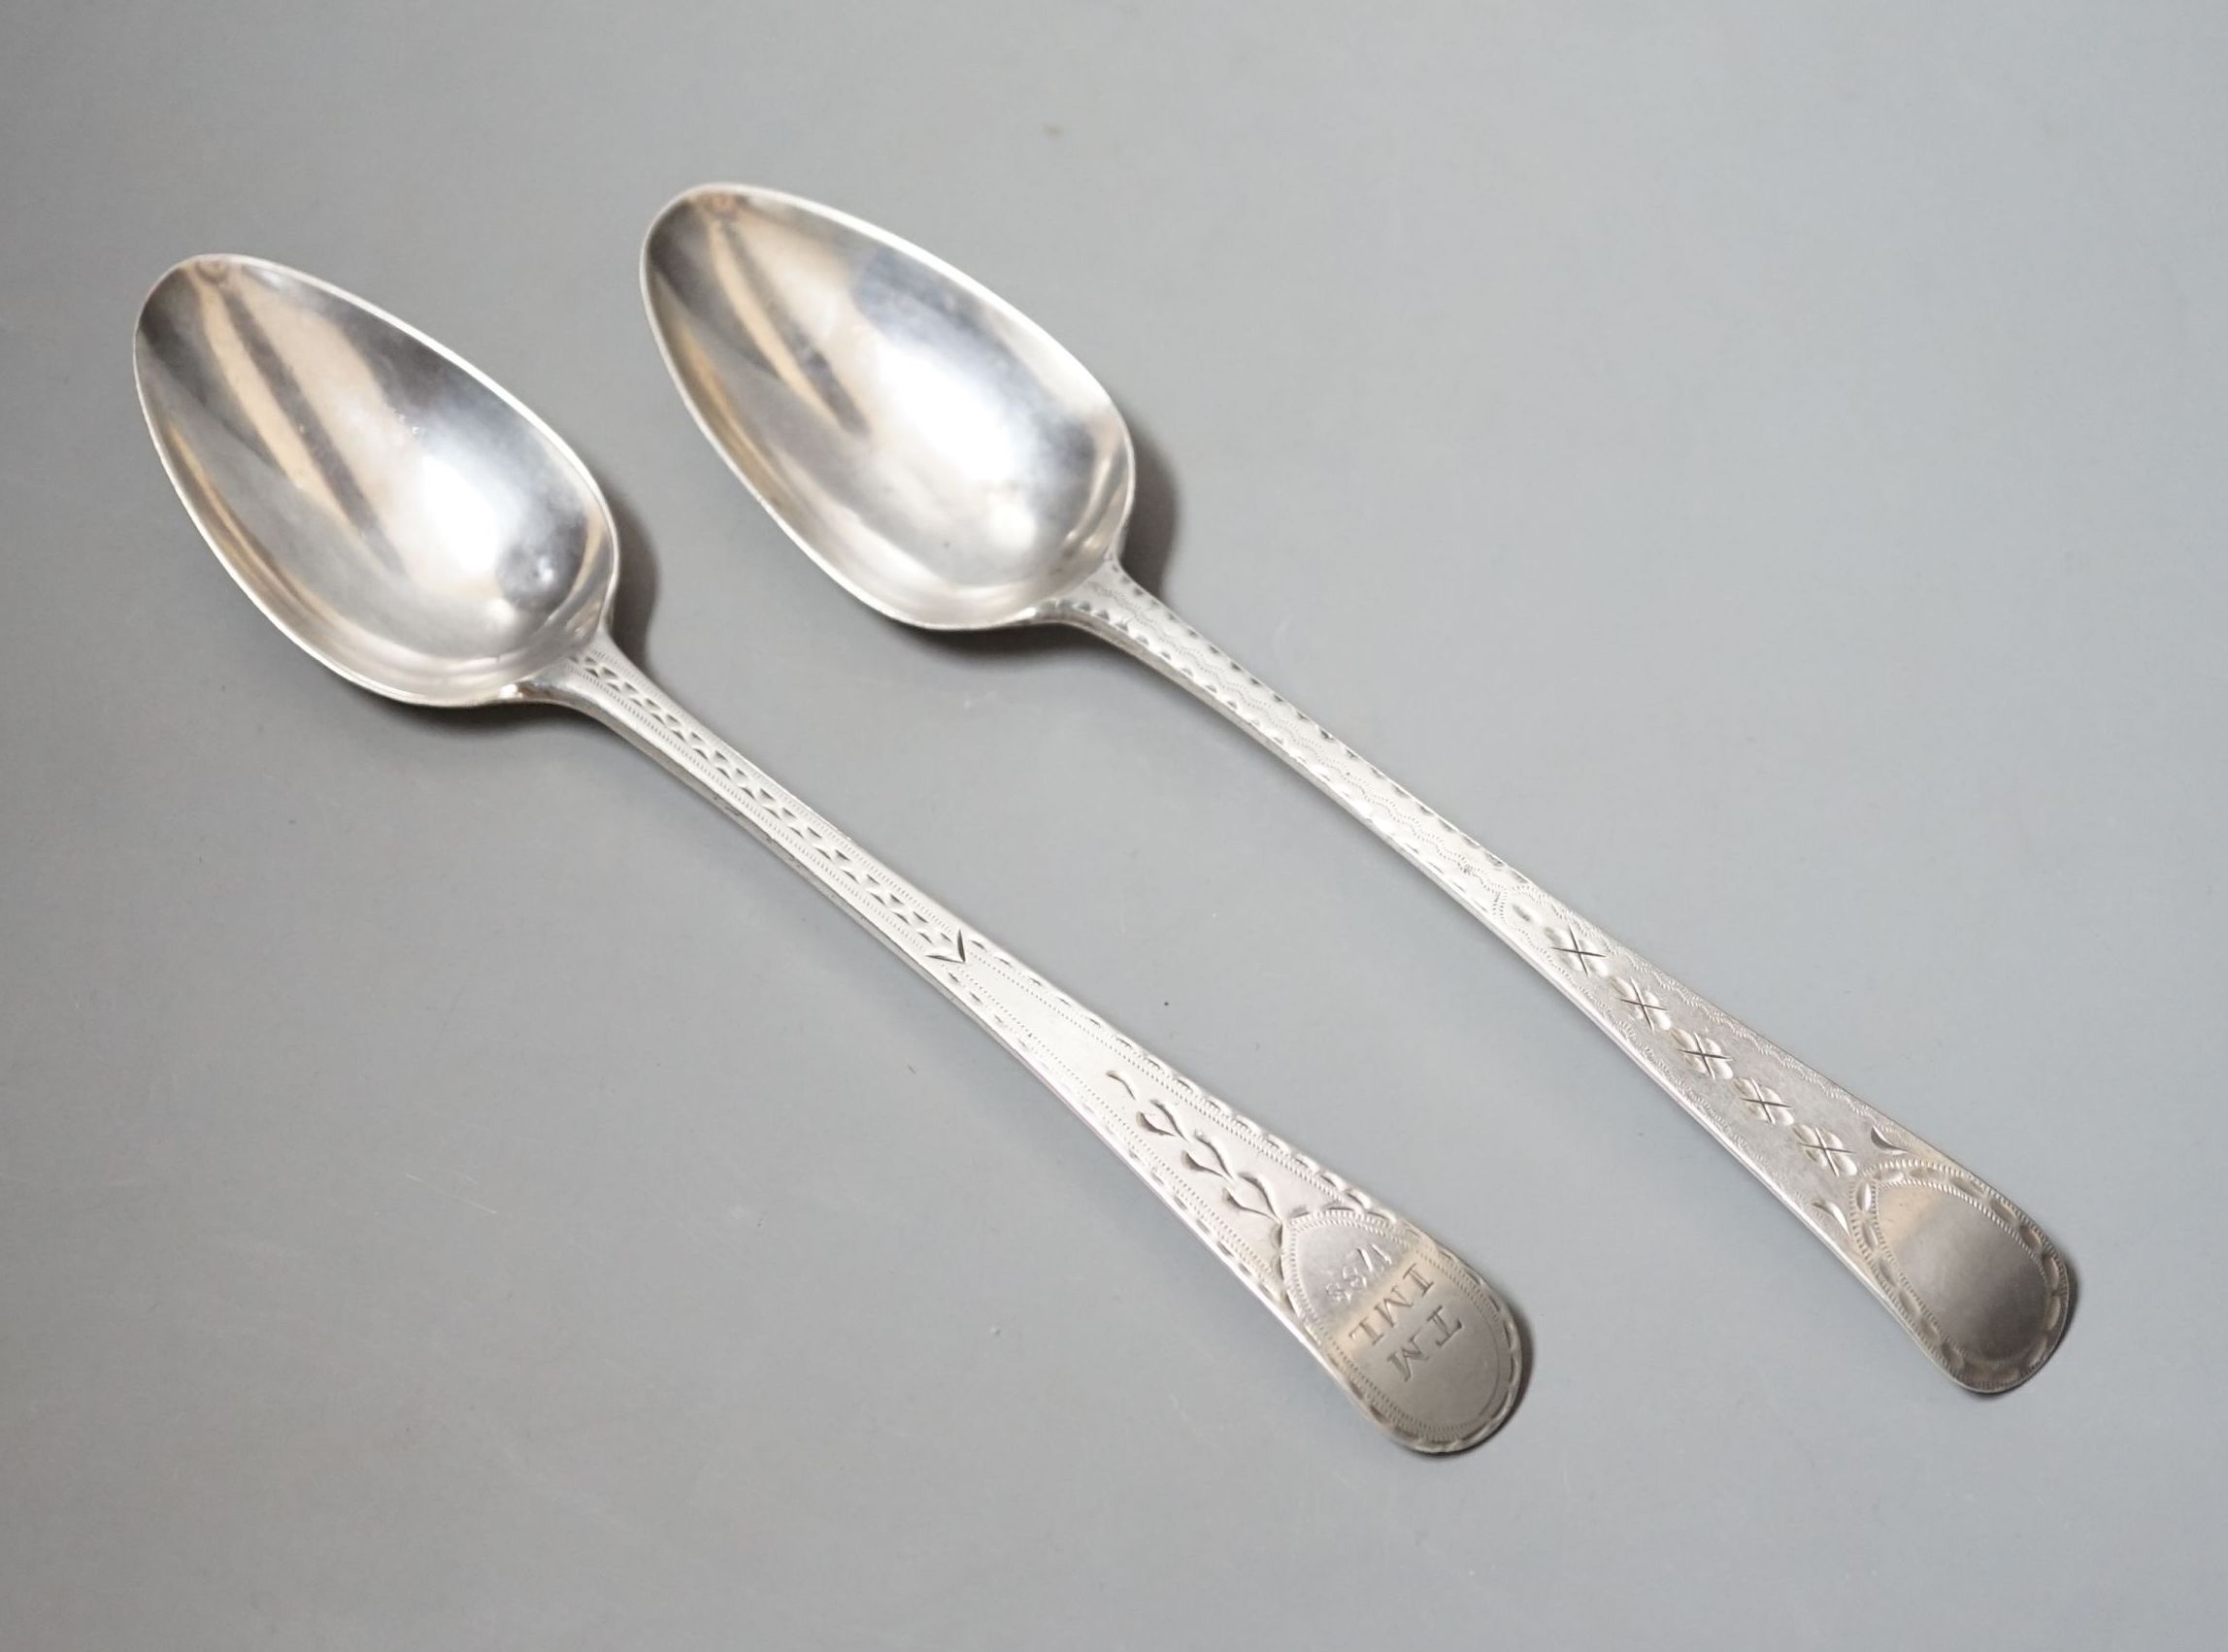 A near pair of George III provincial silver Old English pattern table spoons, by Richard Ferris, Exeter, 1791, with differing bright engraving and one with engraved date and initials, 21.4cm, 110 grams